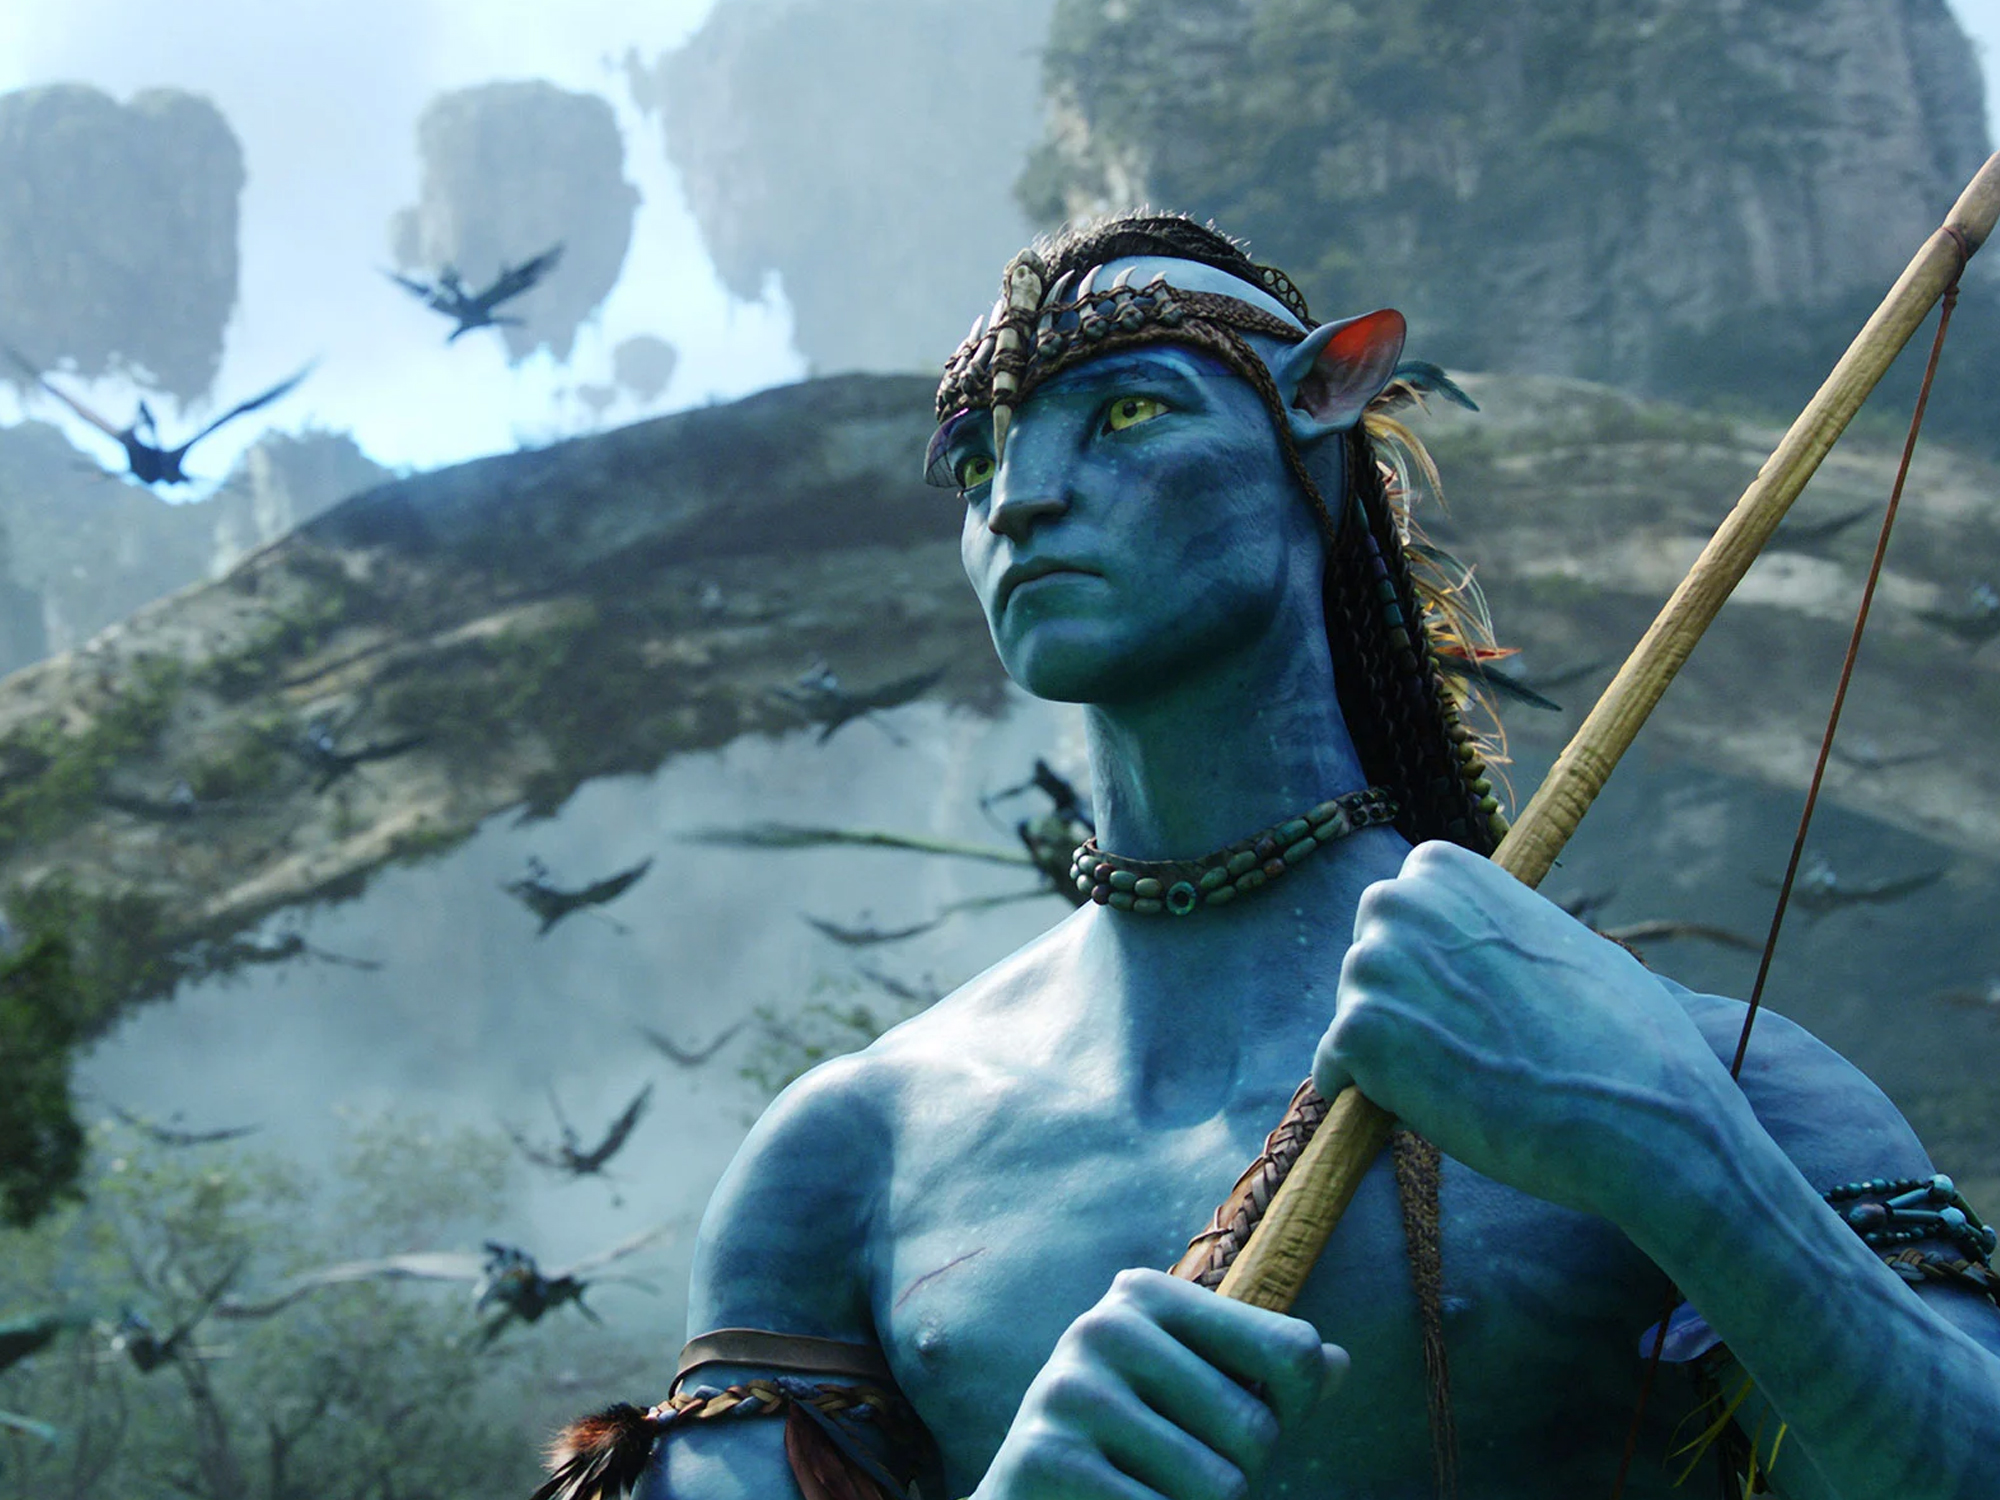 Avatar: The Way Of Water - how gaming tech helped bring Oscars